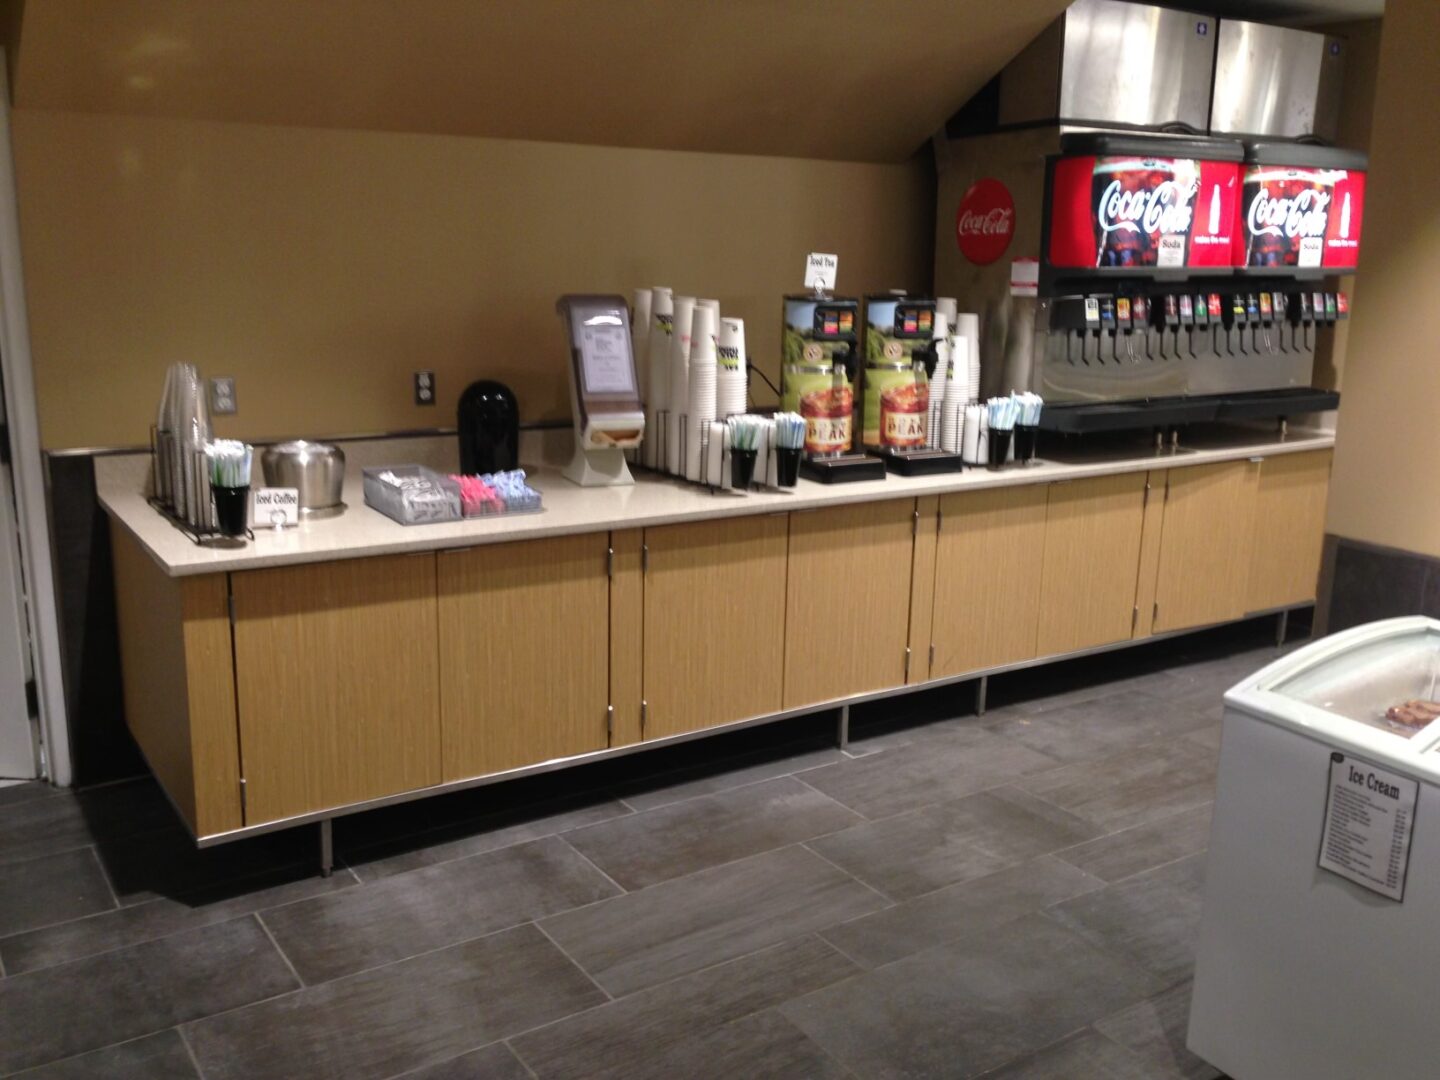 Close view of the coffee machines and cool drink machines